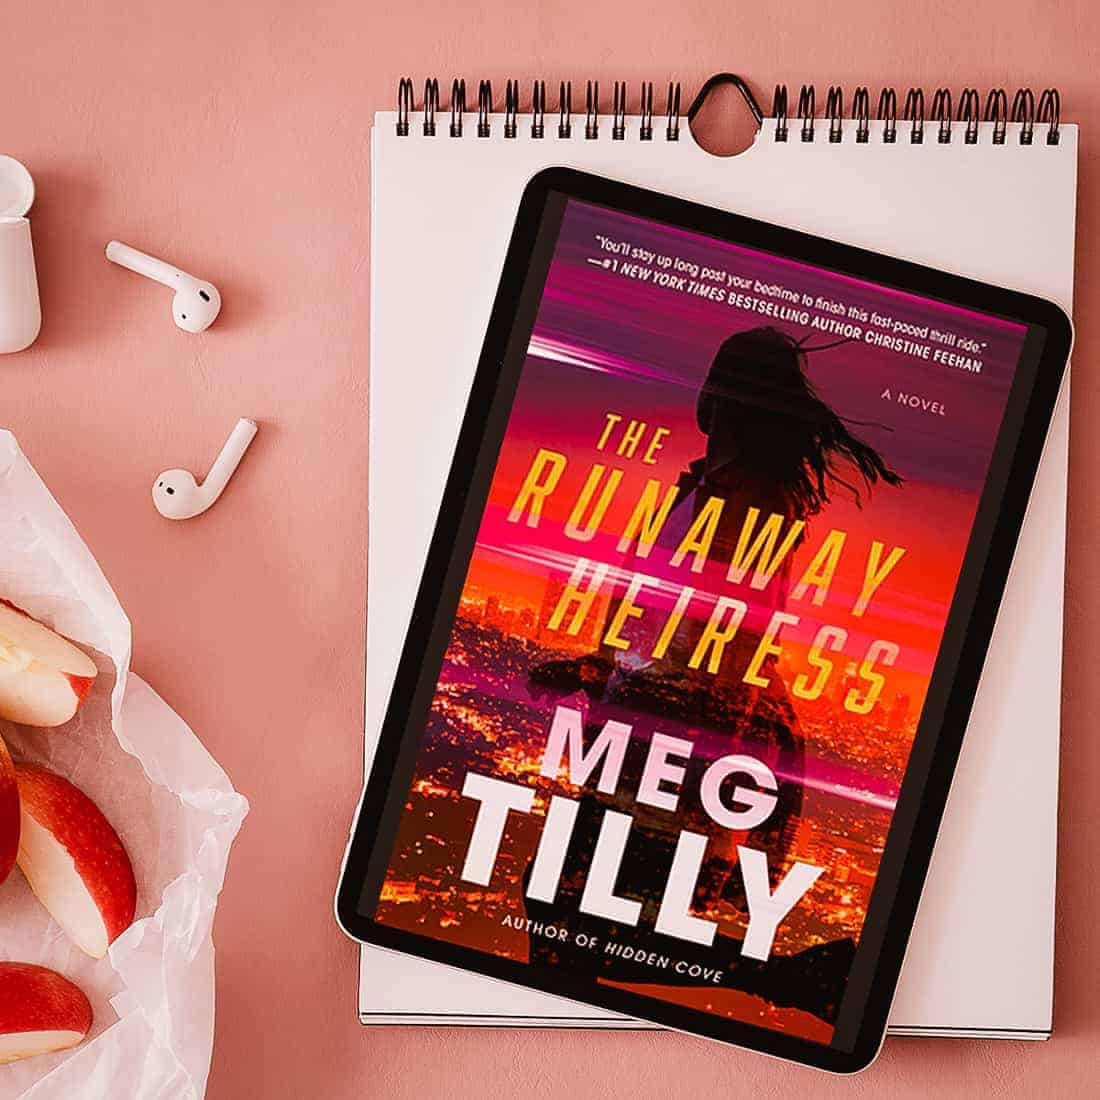 Read an Excerpt from The Runaway Heiress by Meg Tilly!